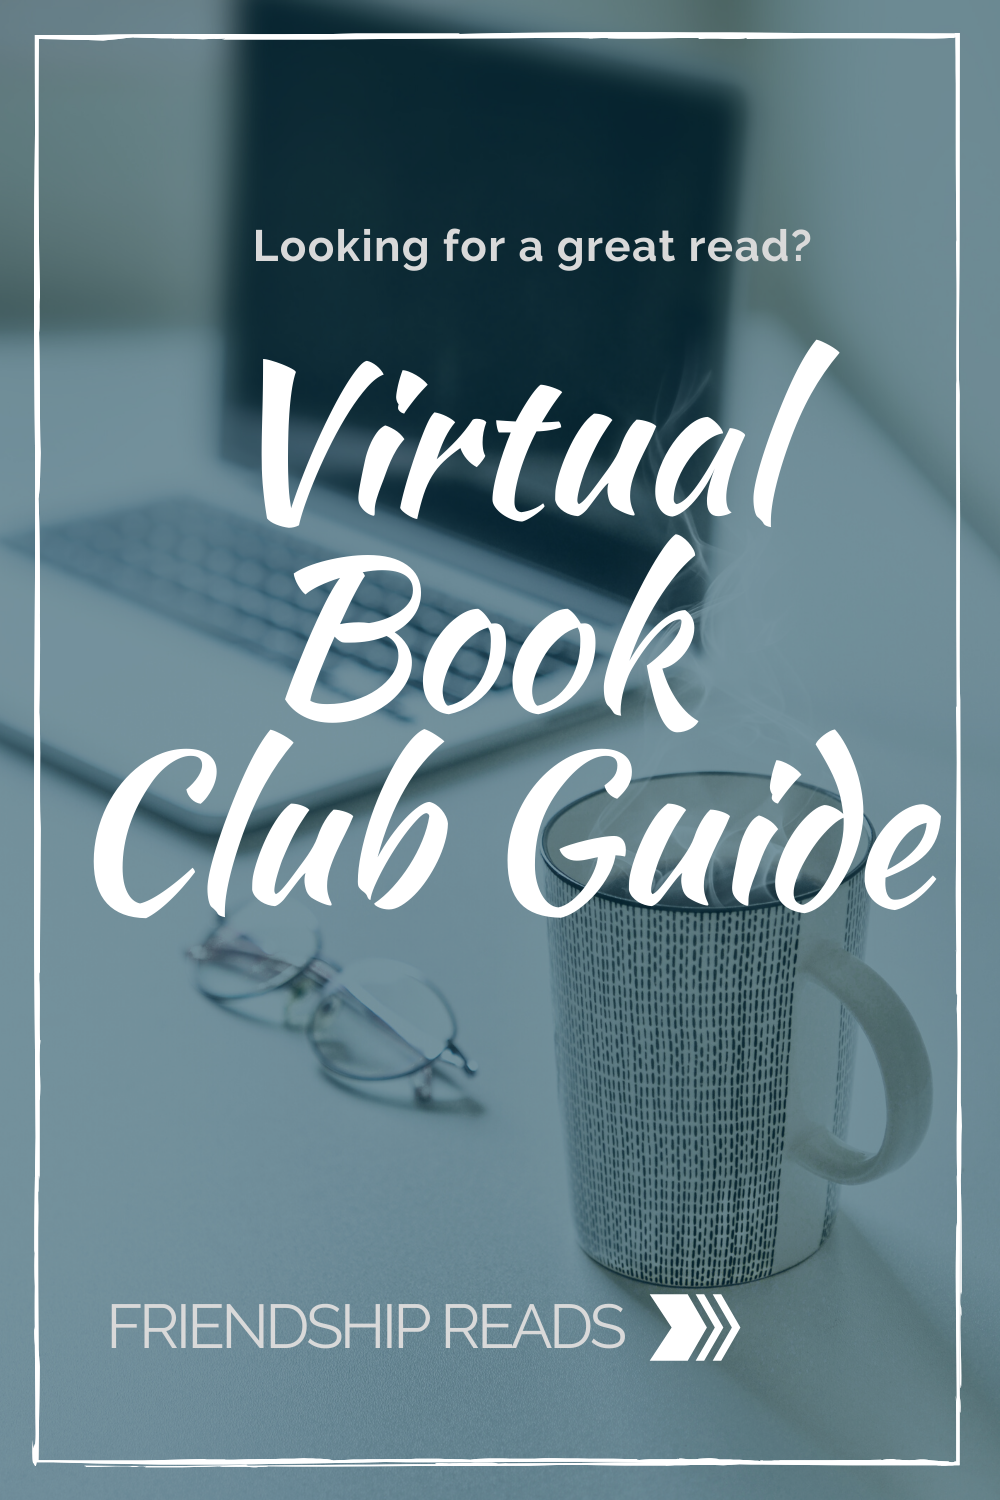 How to host a virtual book club during the Covid-19 crisis? We've got a fun an engaging plan for your to connect with friends virtually.